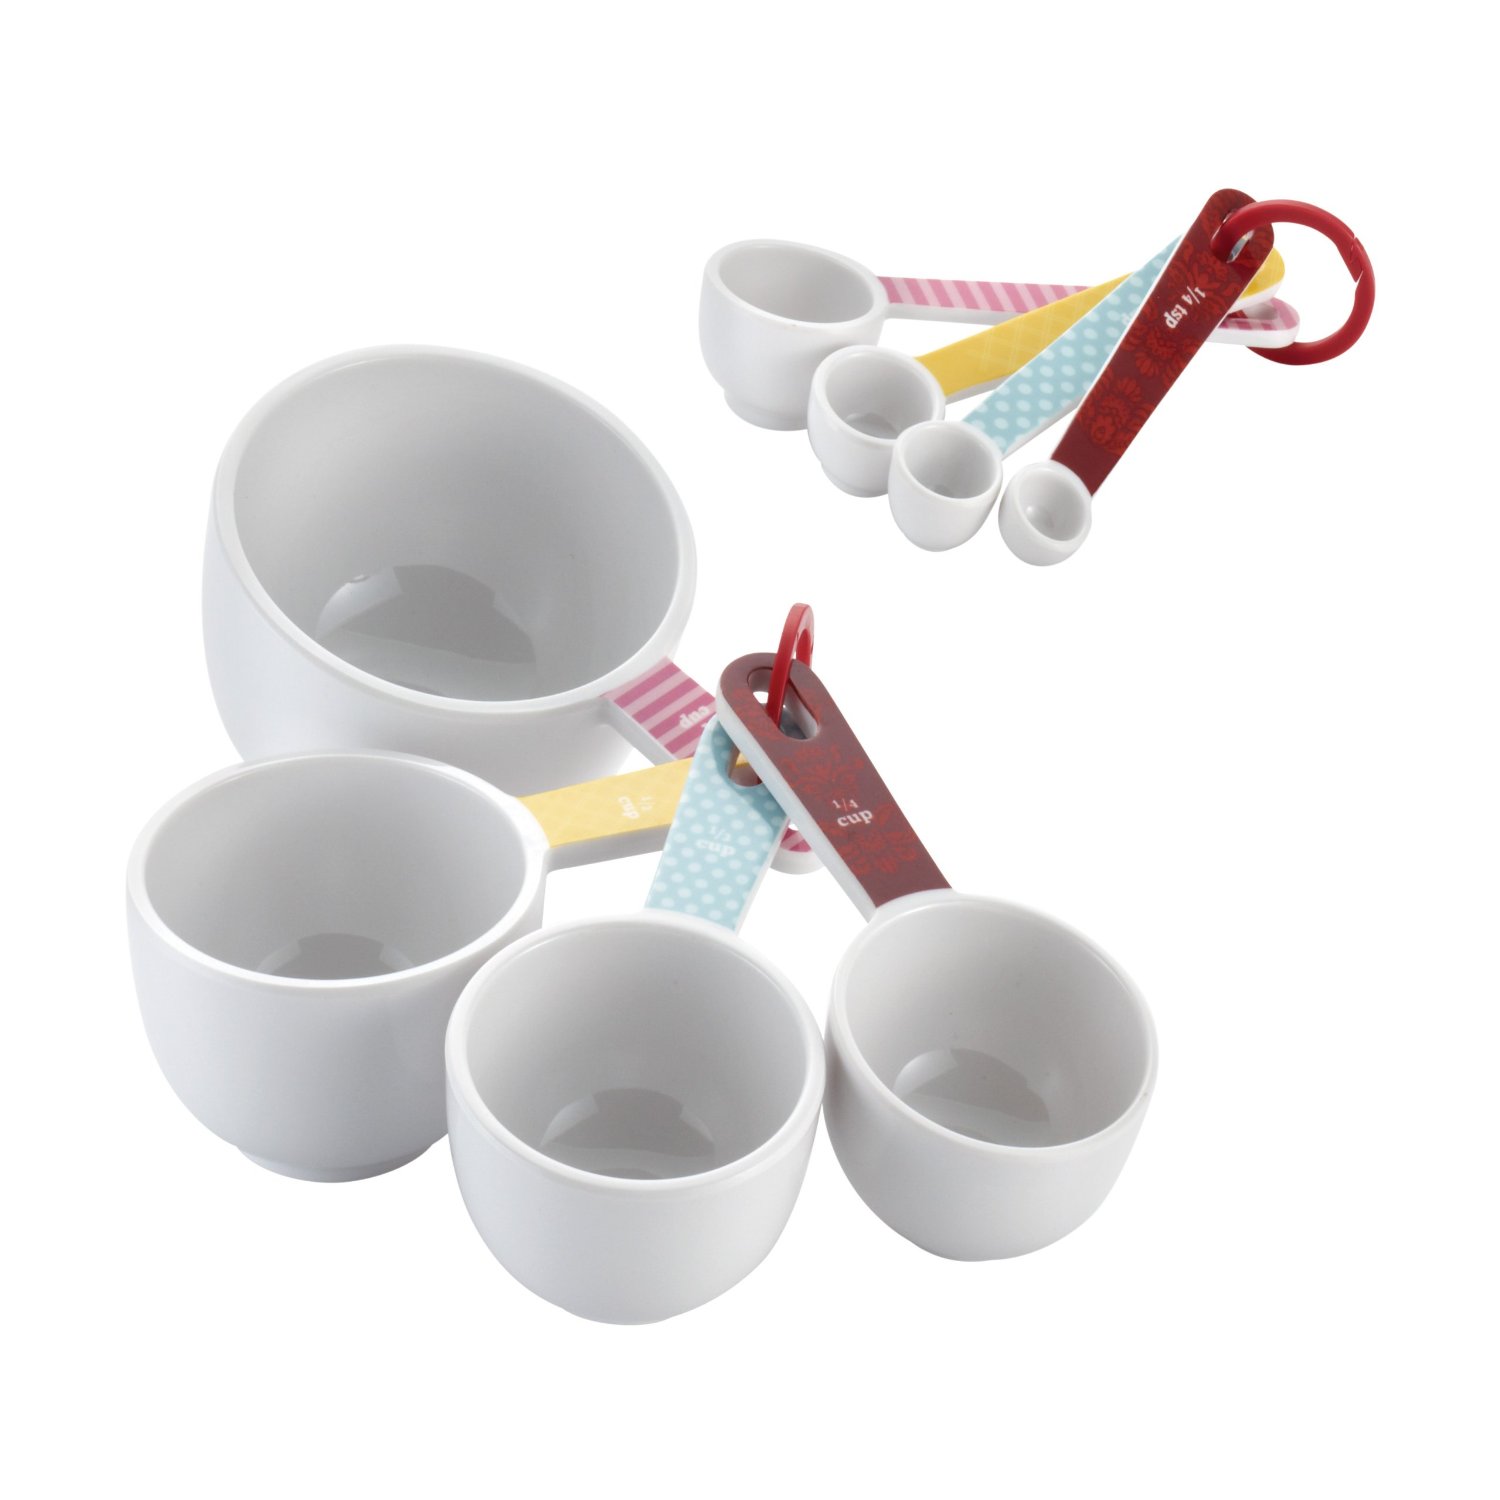 Cake Boss 8-Piece Melamine Measuring Cups and Spoons Set – Just $11.99!